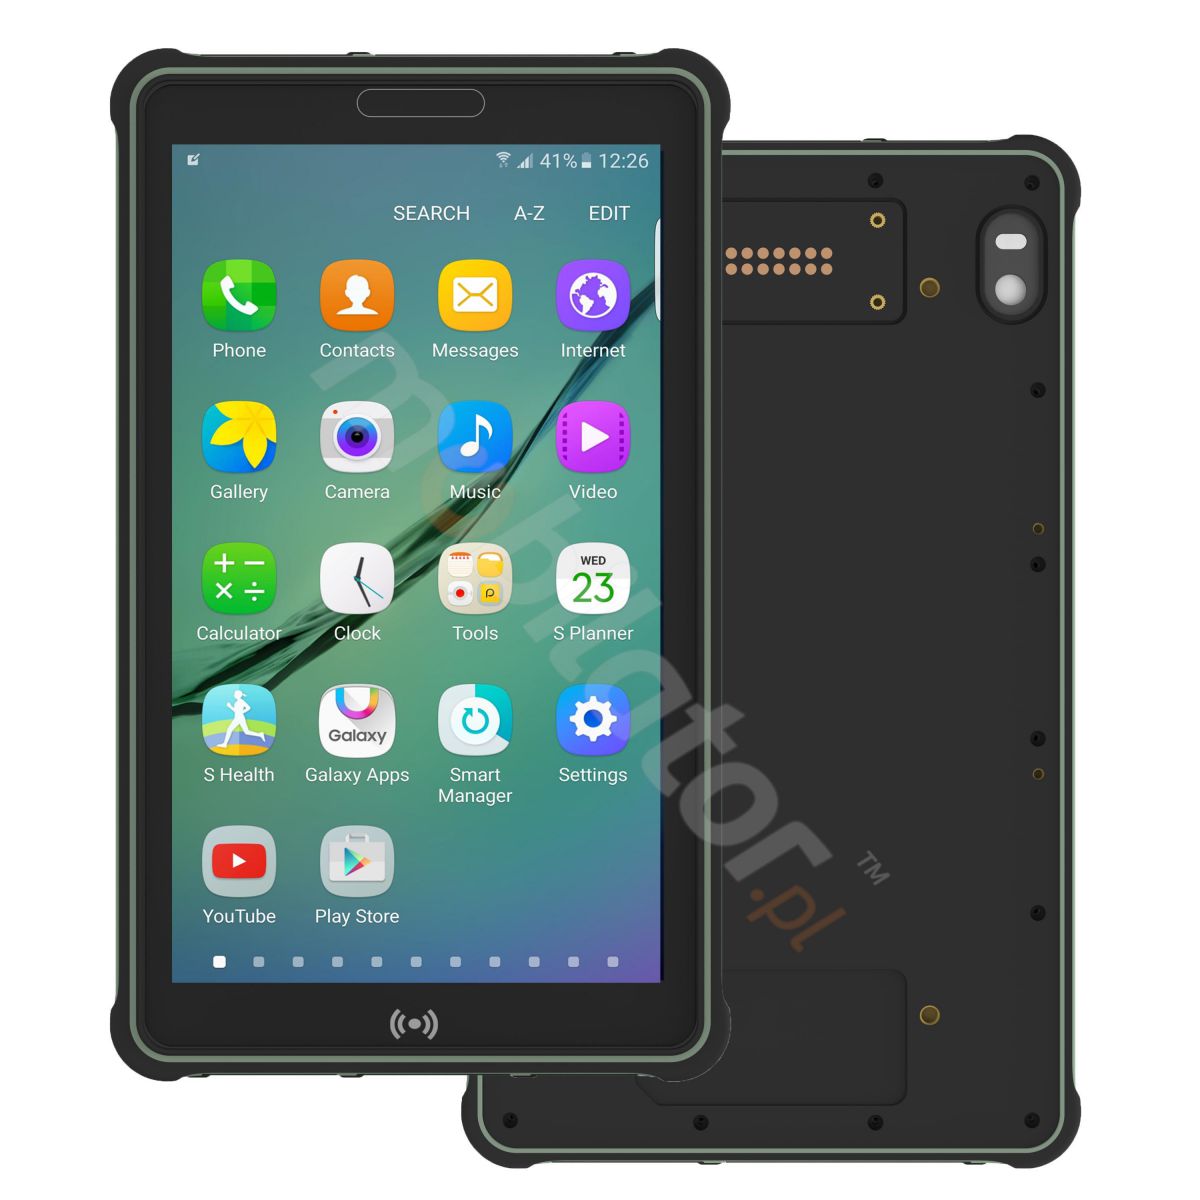 Industrial 8-inch rugged tablet with 128GB ROM disk and 6GB RAM memory, Android 7.0, 4G operating system, IP65 and NFC standards - Mobipad 800ATS3 v.1 